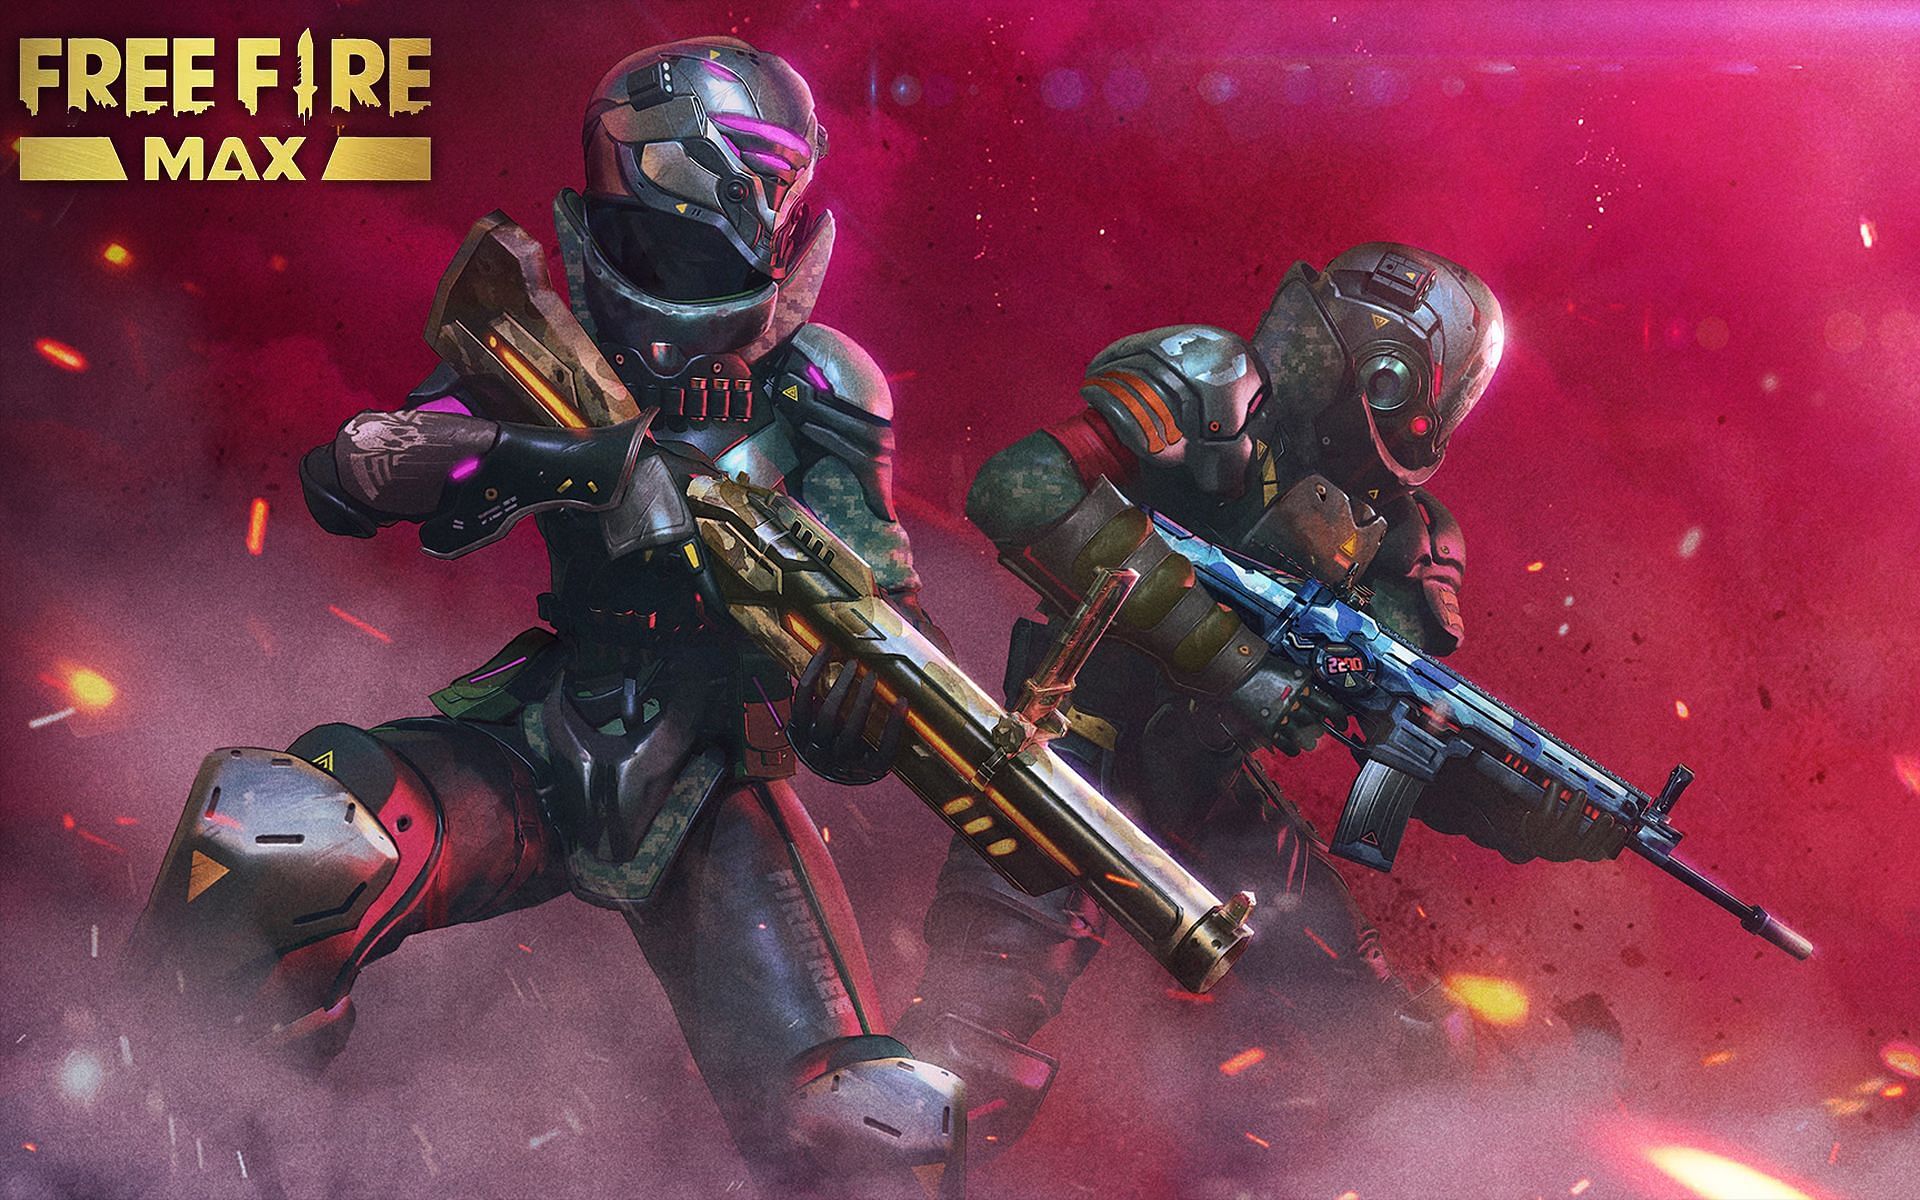 Mastering the use of smoke grenades in Free Fire MAX will be a game-changer (Image via Garena Free Fire MAX)